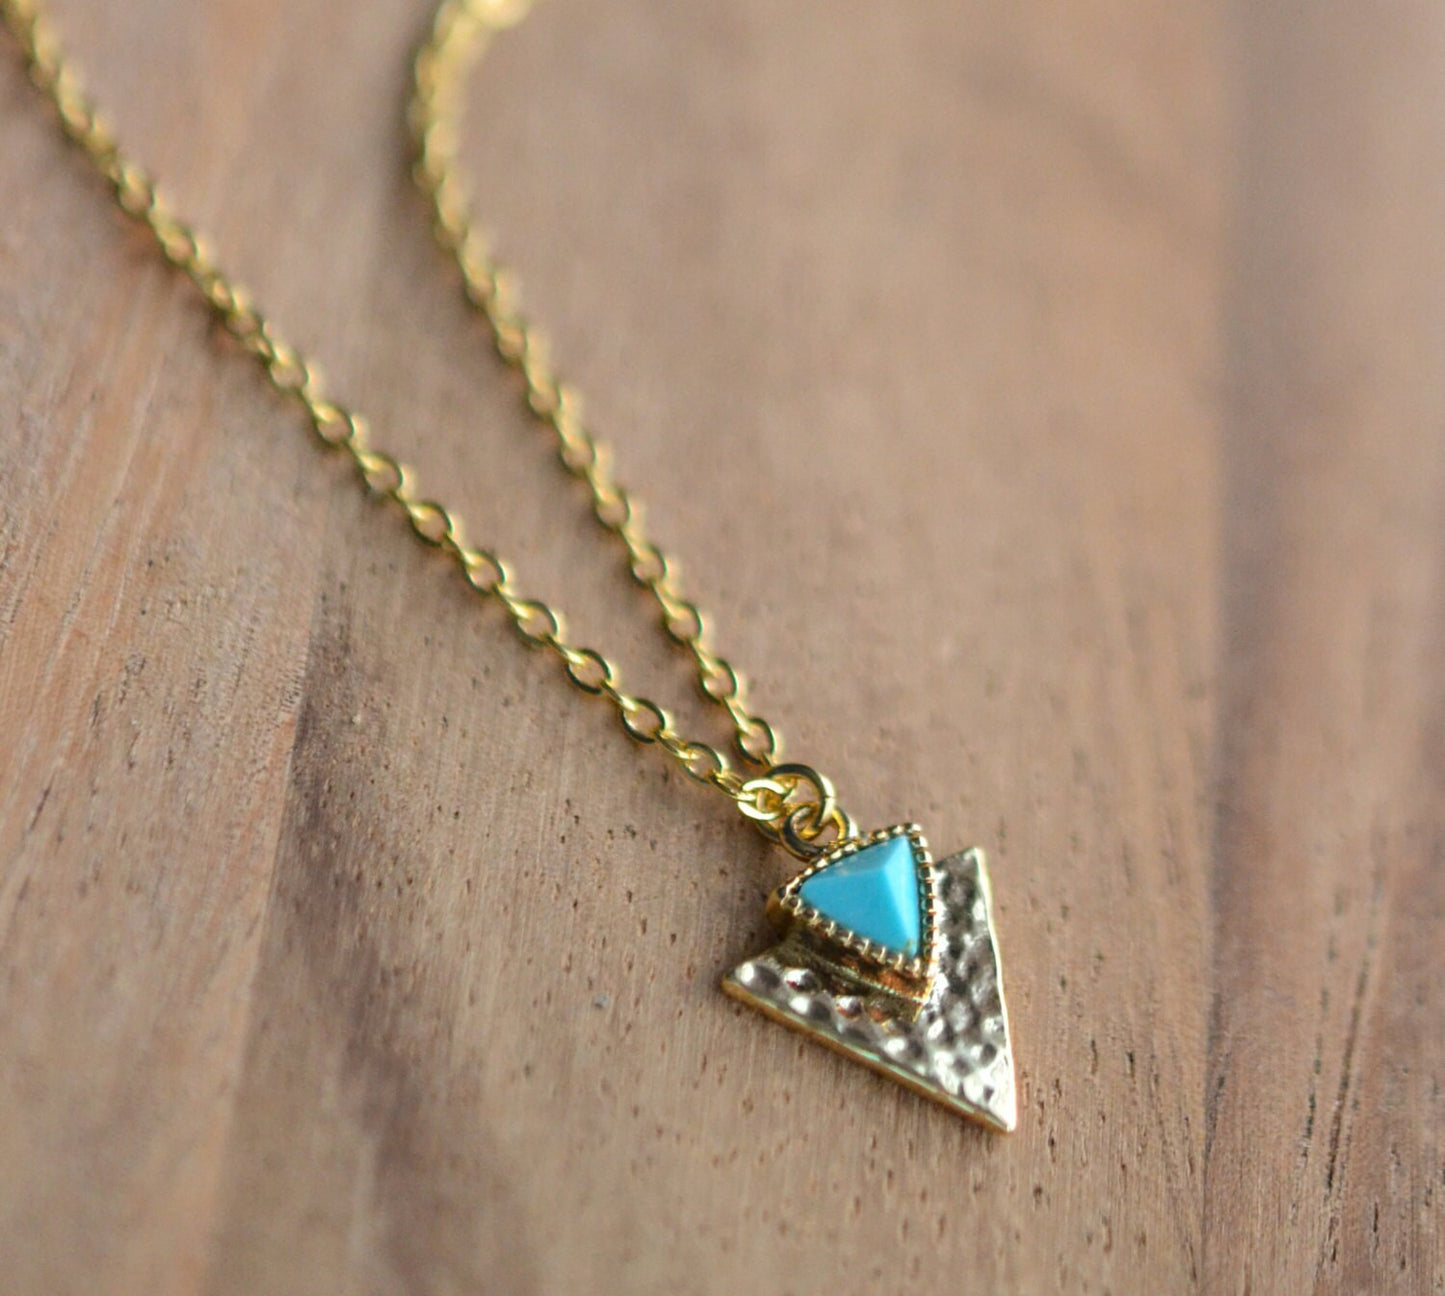 Gold Triangle Necklace with Turquoise Accent // Simple Gold Turquoise Pendant Necklace // GIFT FOR HER // Geometric // Bridesmaid Gift